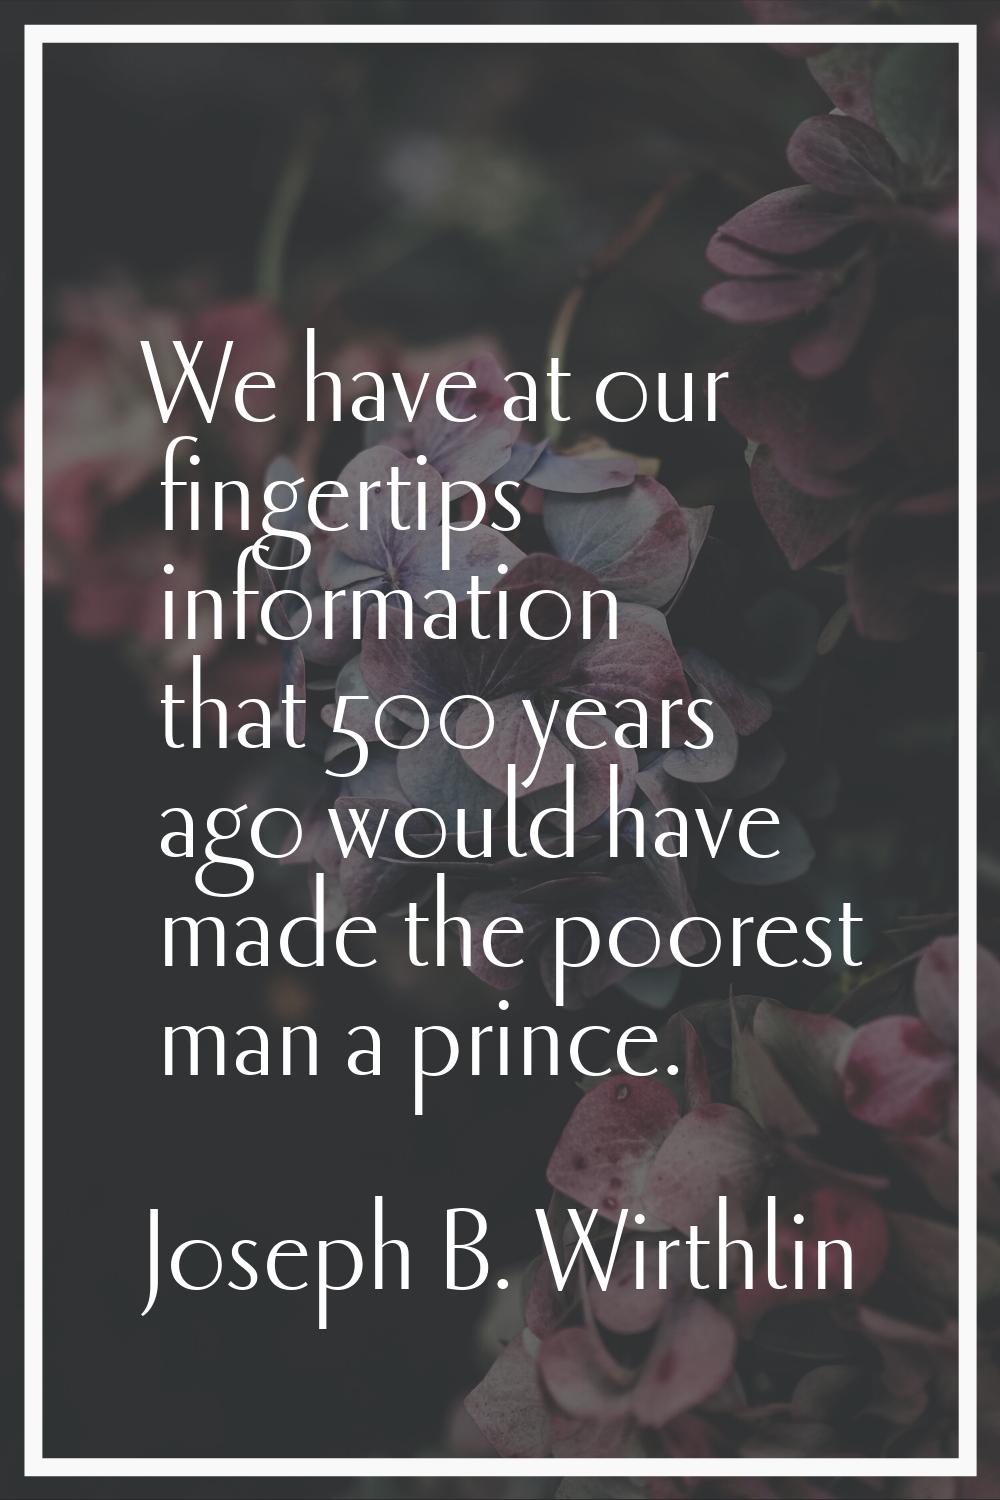 We have at our fingertips information that 500 years ago would have made the poorest man a prince.